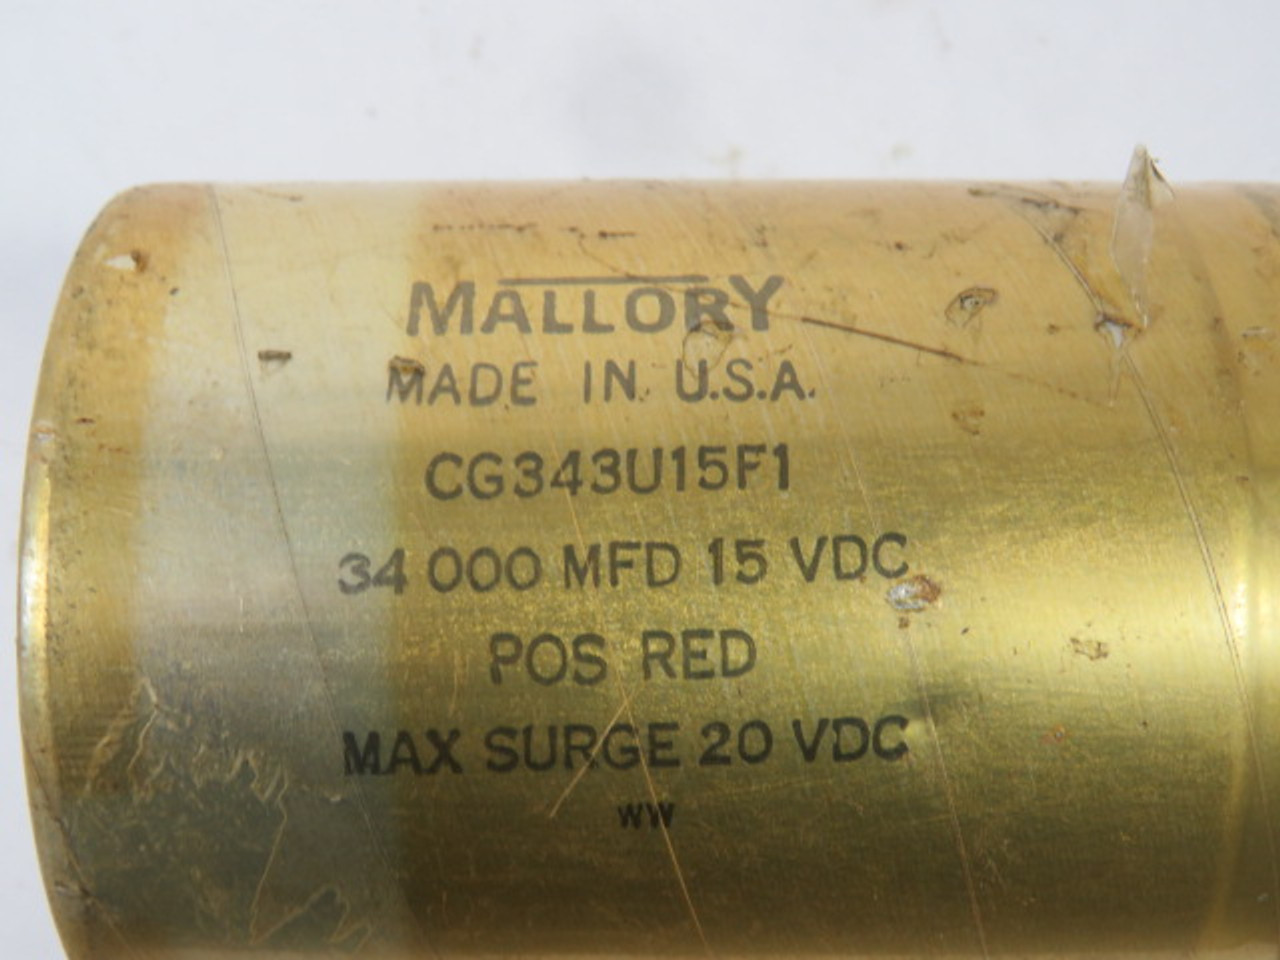 Mallory CG343U15F1 Electrolytic Capacitor 34,000MFD 15VDC POS RED USED